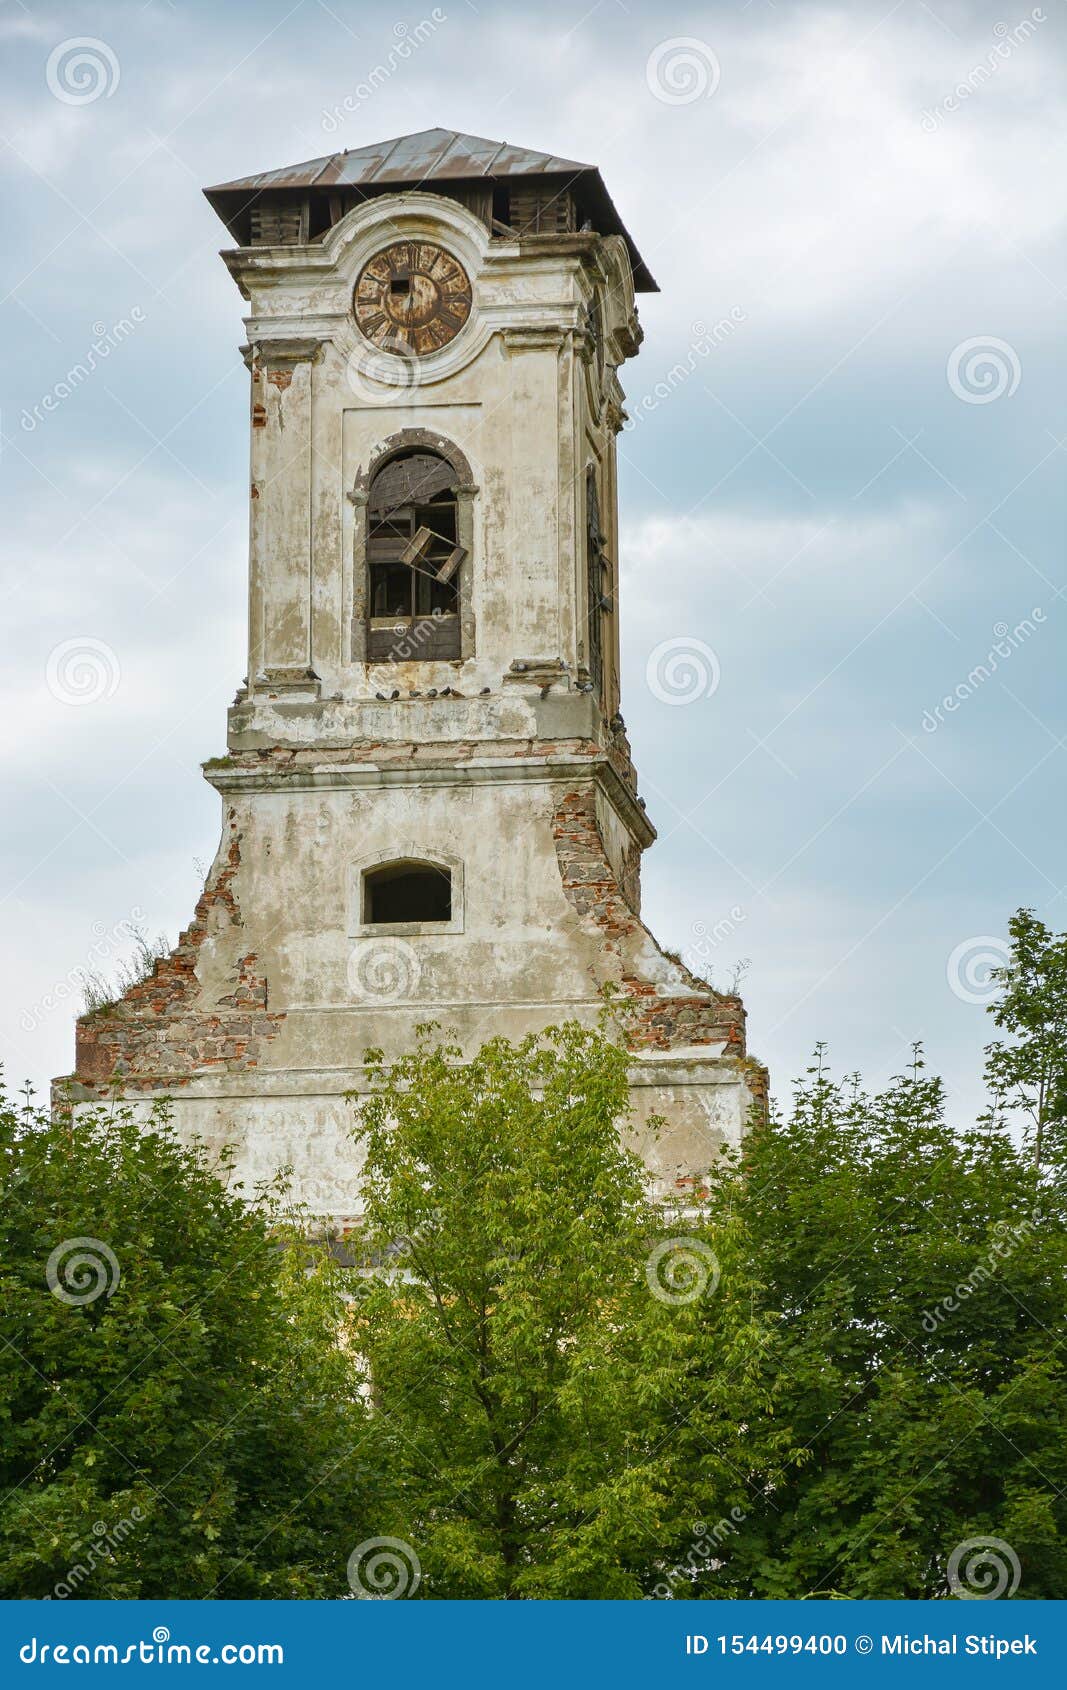 ruins of old tower with clock in preso